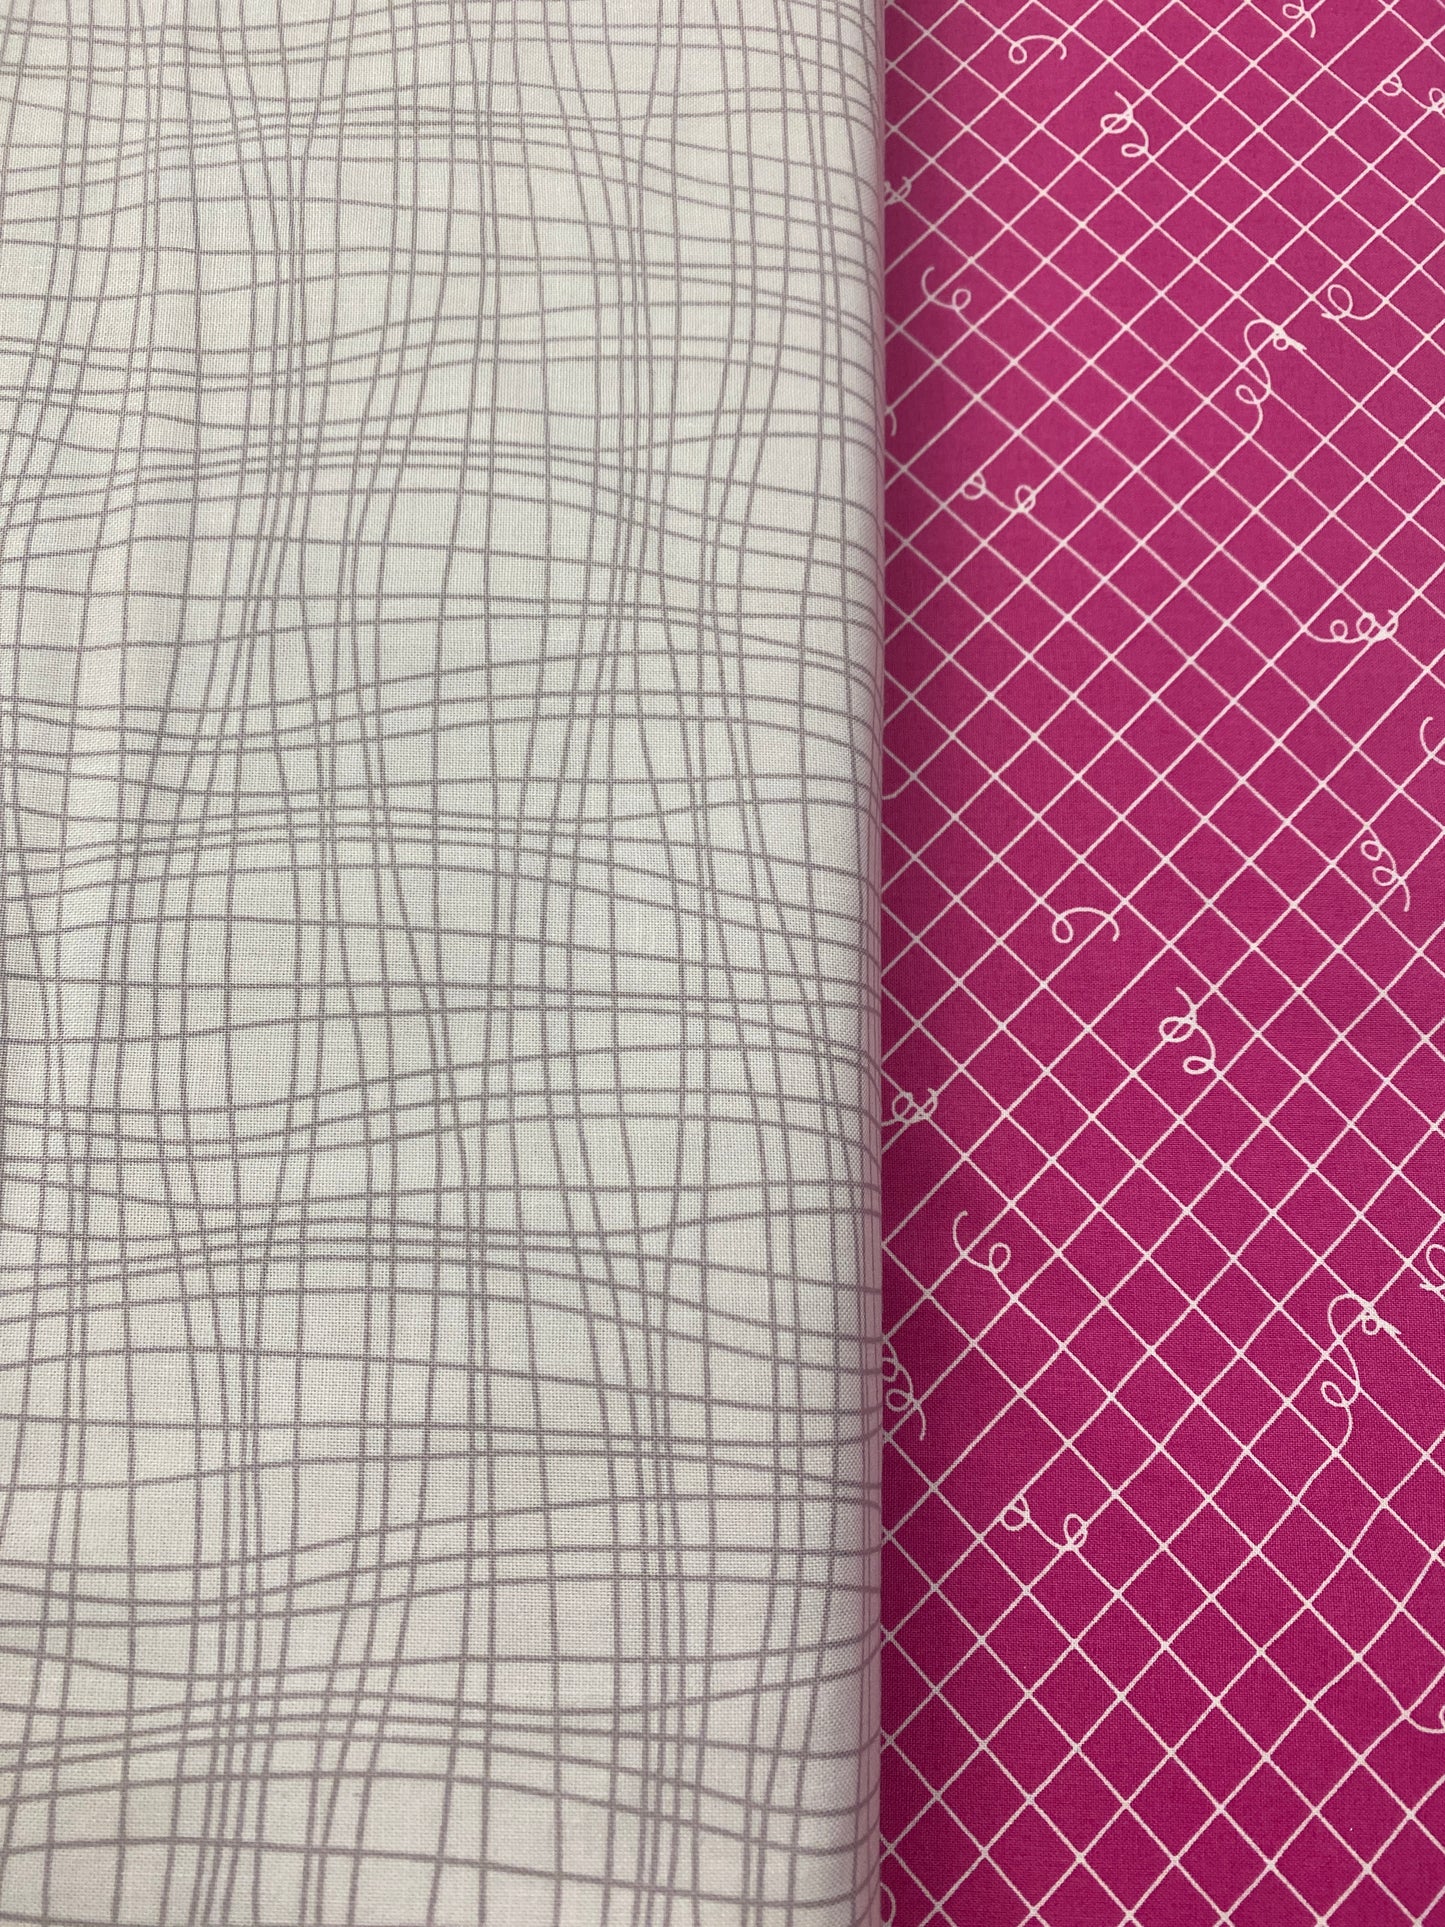 Plaid, Lines, and Dots Fabric